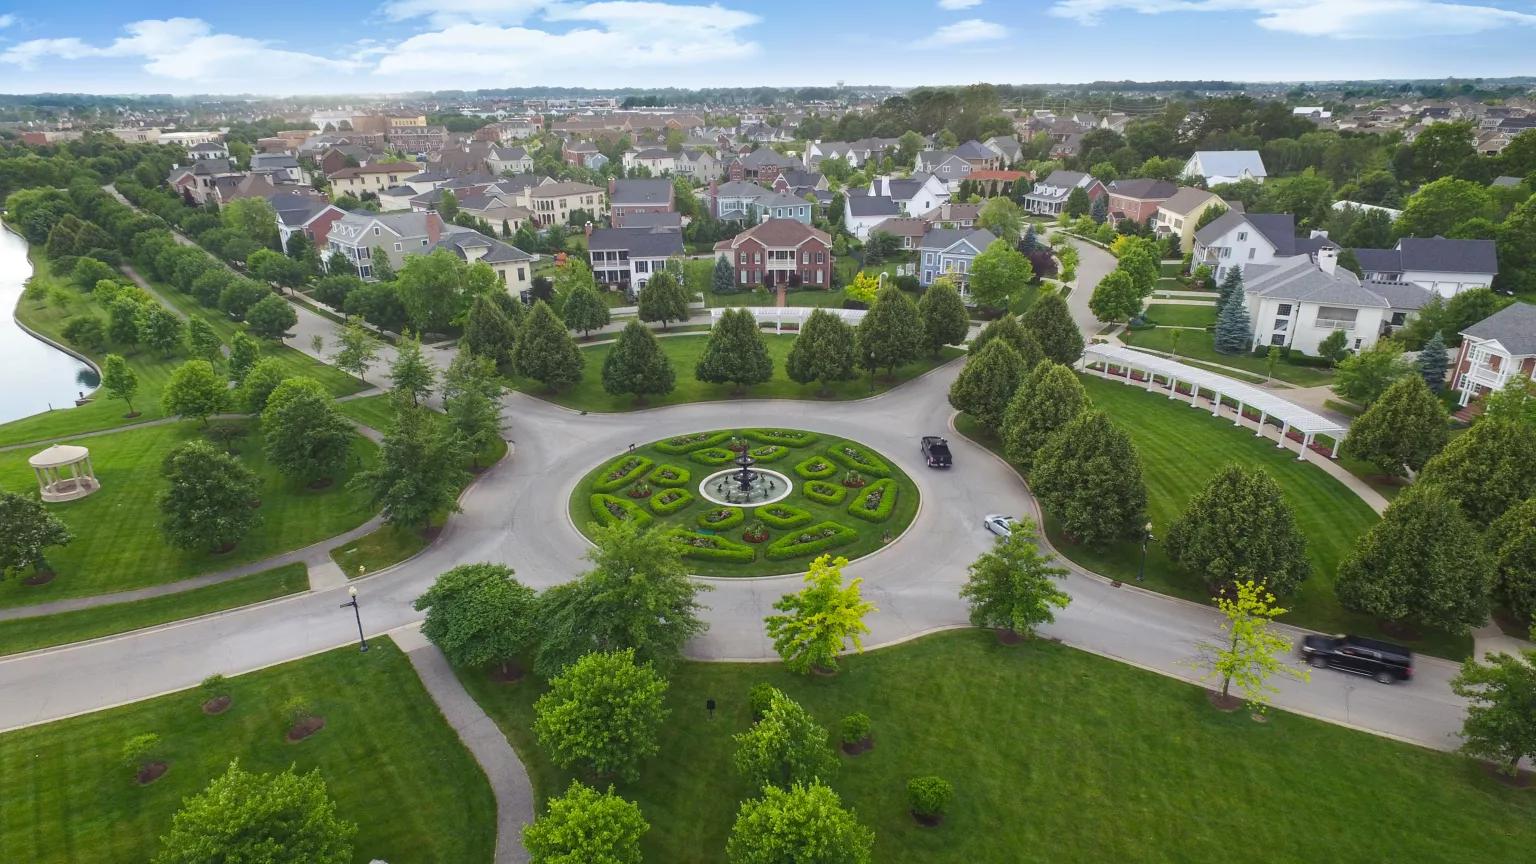 An aerial view of a traffic circle in a landscaped neighborhood